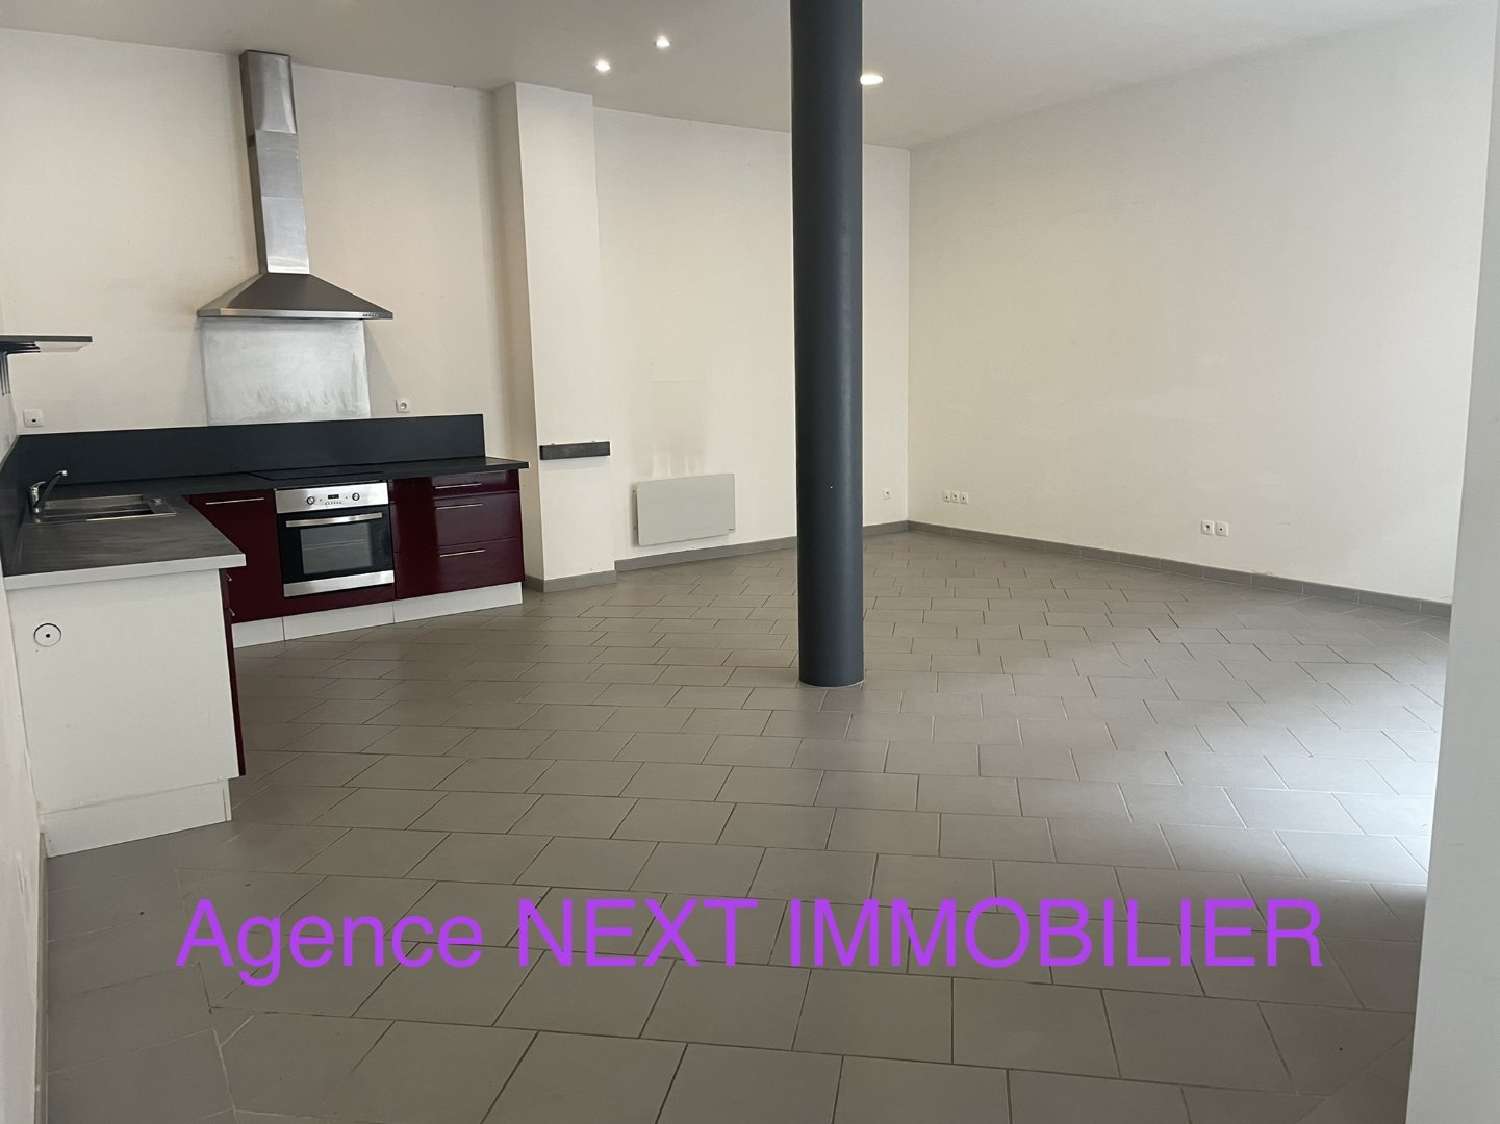  for sale house Libourne Gironde 4